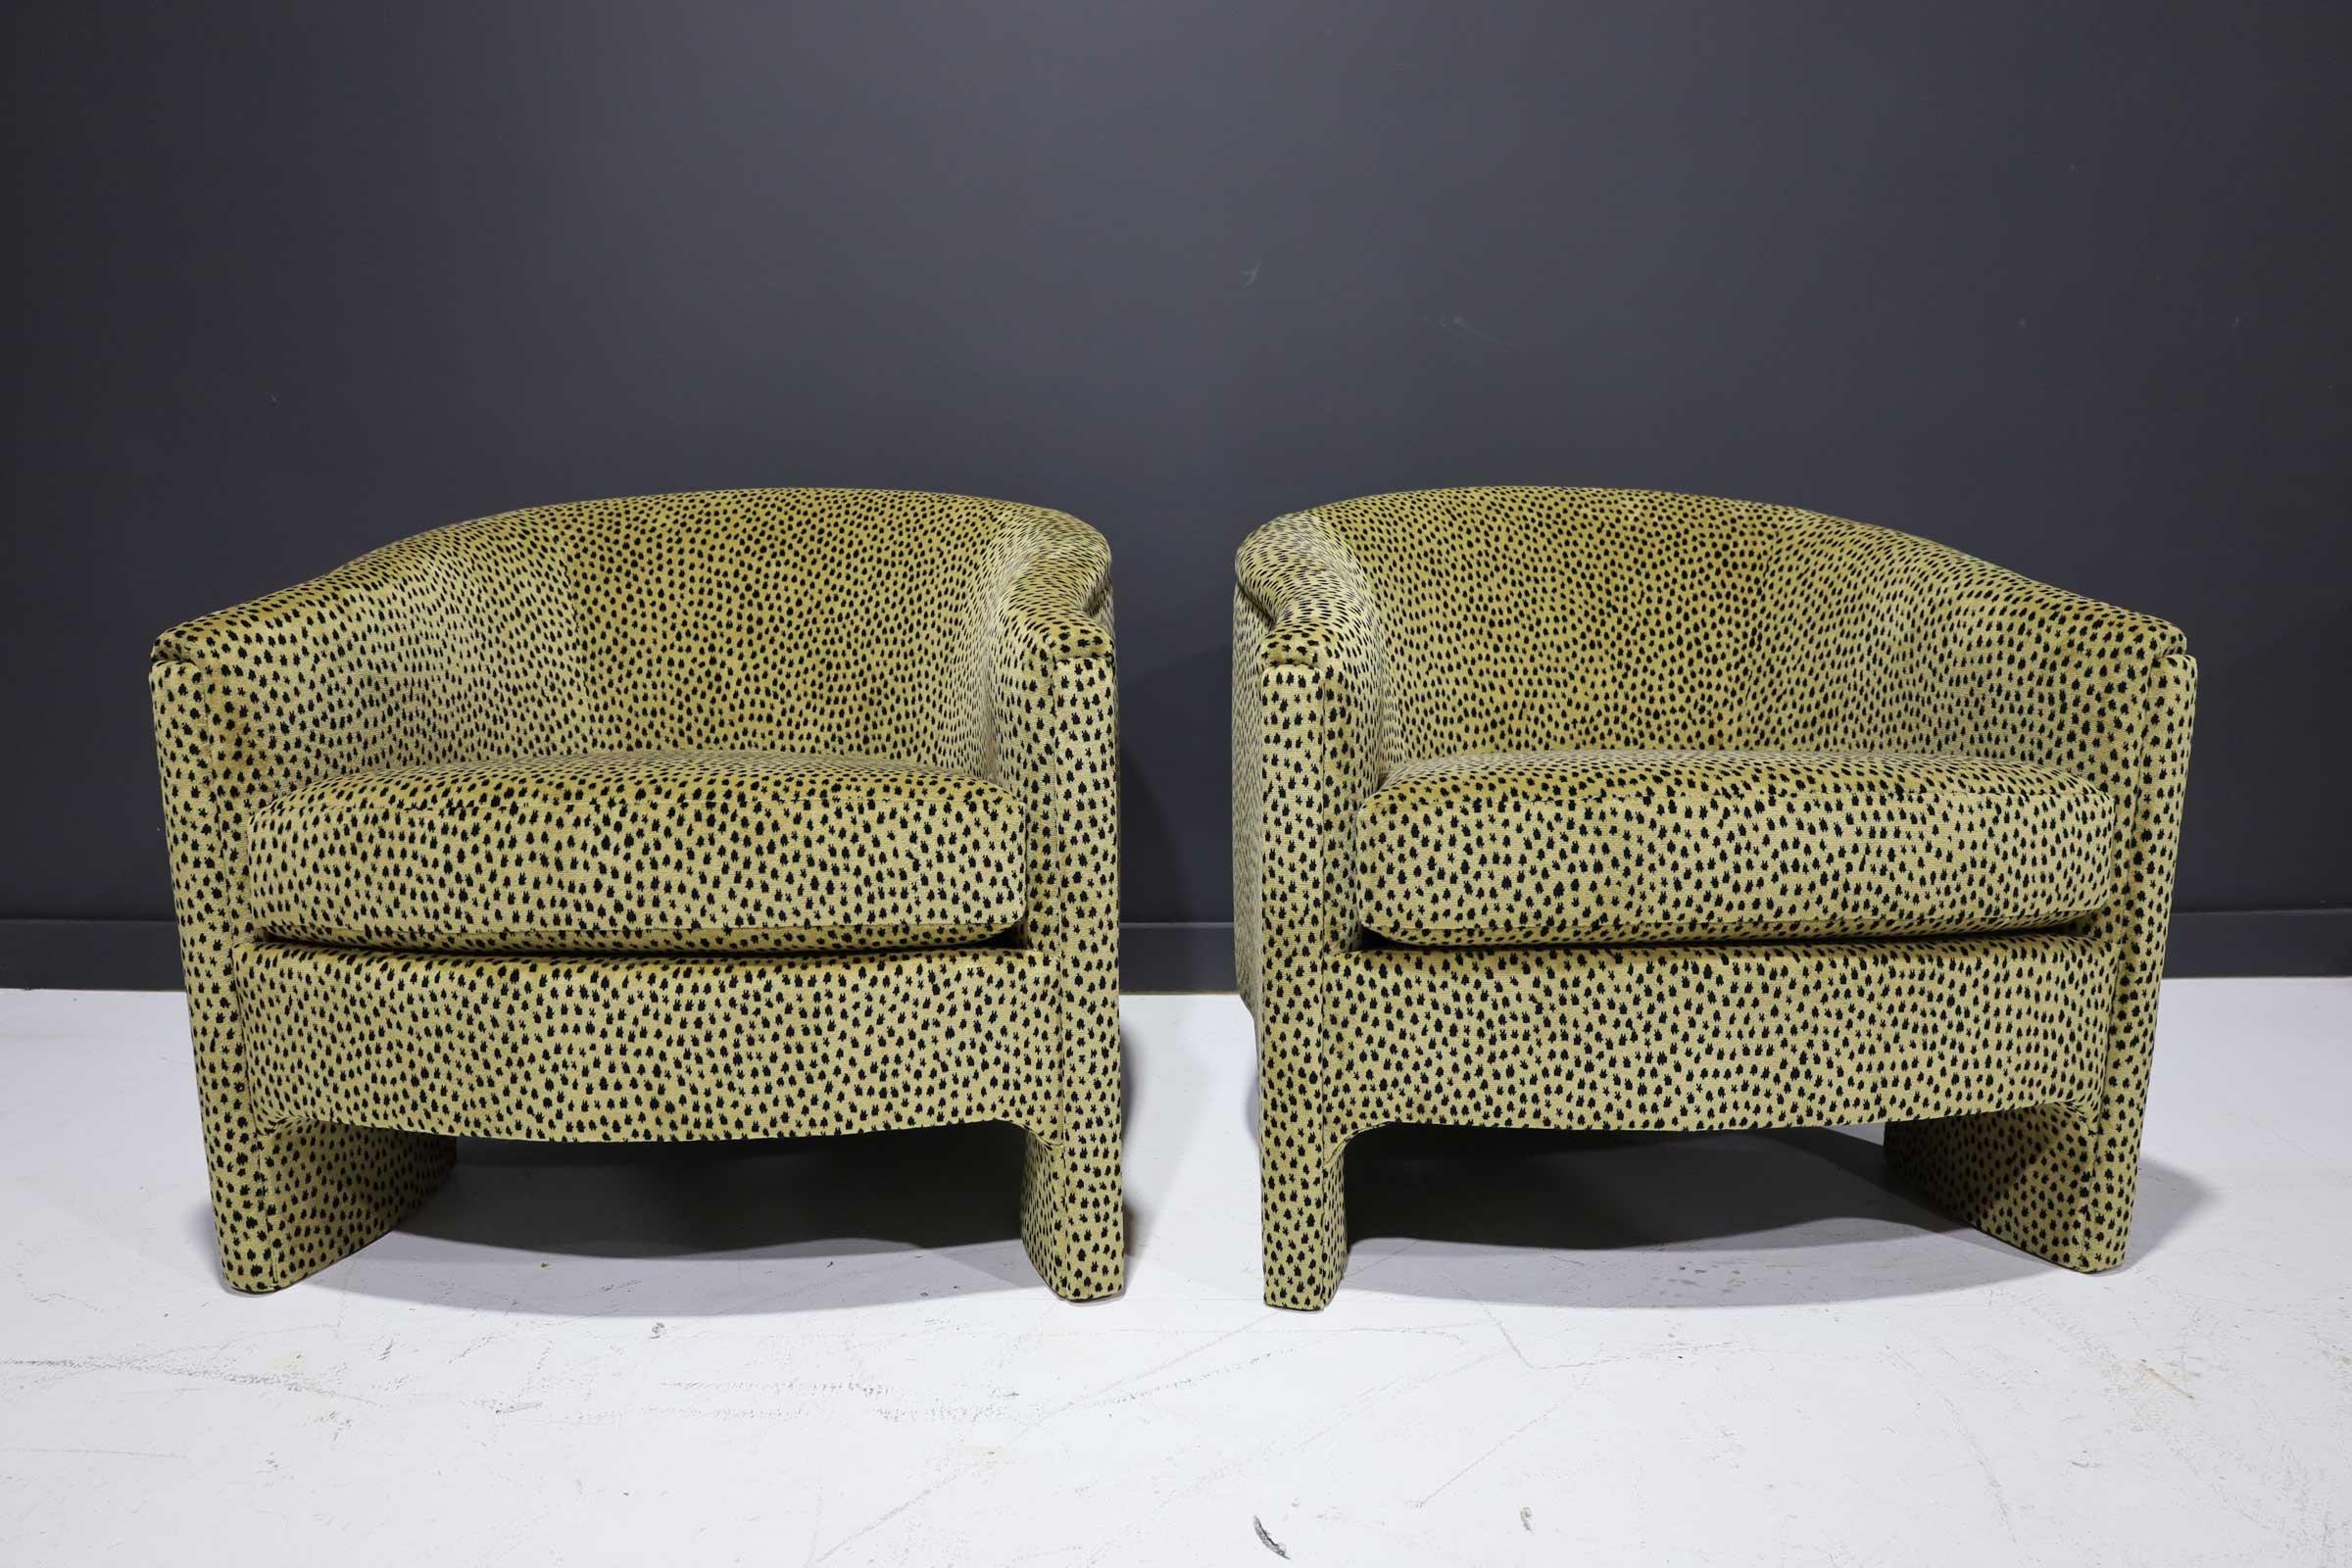 Luxurious velvet fabric in a cheetah print. This is a pair of Kelly Wearstler style chairs. Chairs are well constructed and very sturdy. Chairs are sculptural with a T-style back.